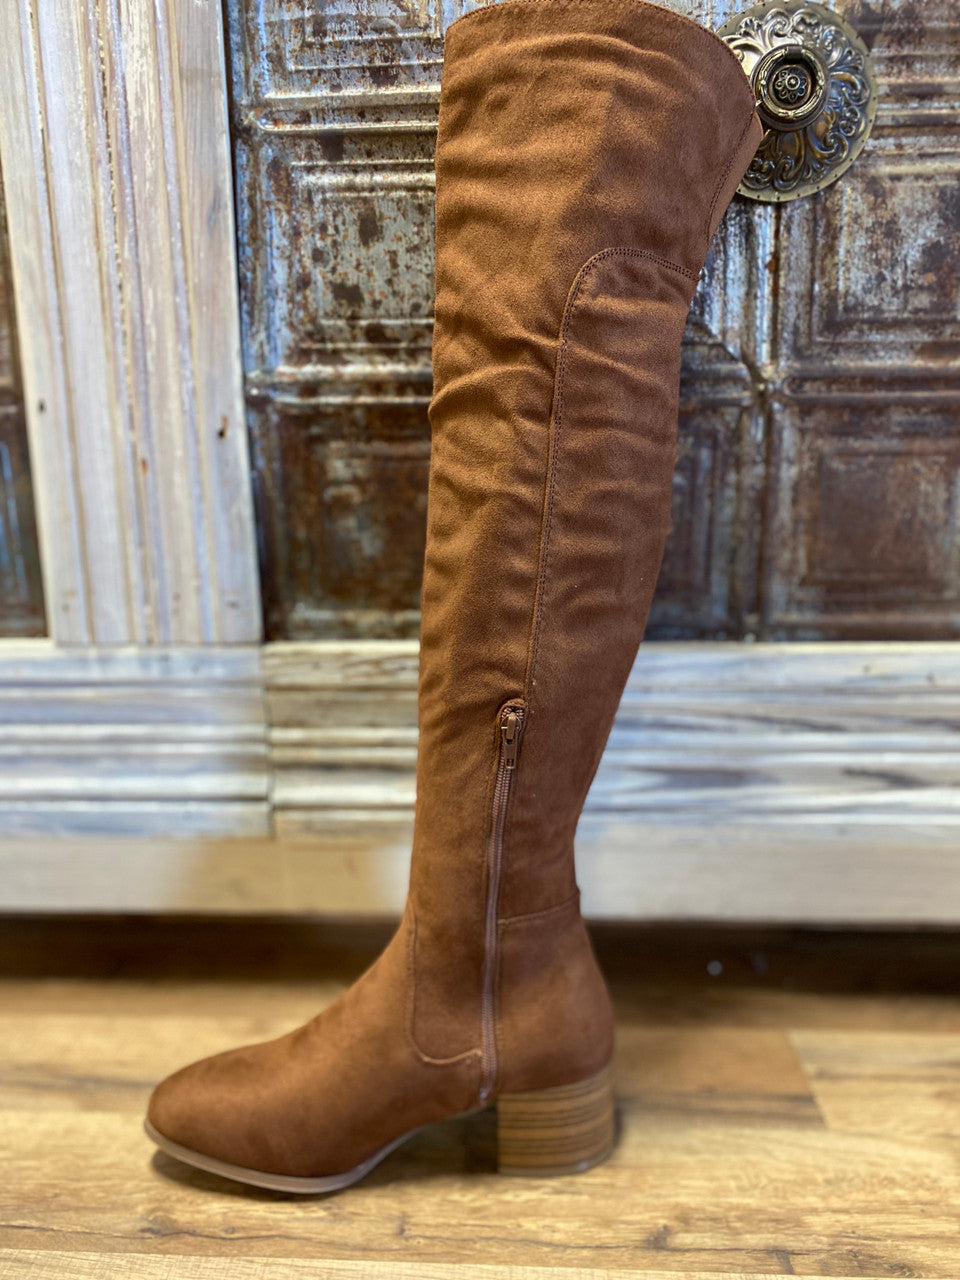 Sepia Knee High Boots